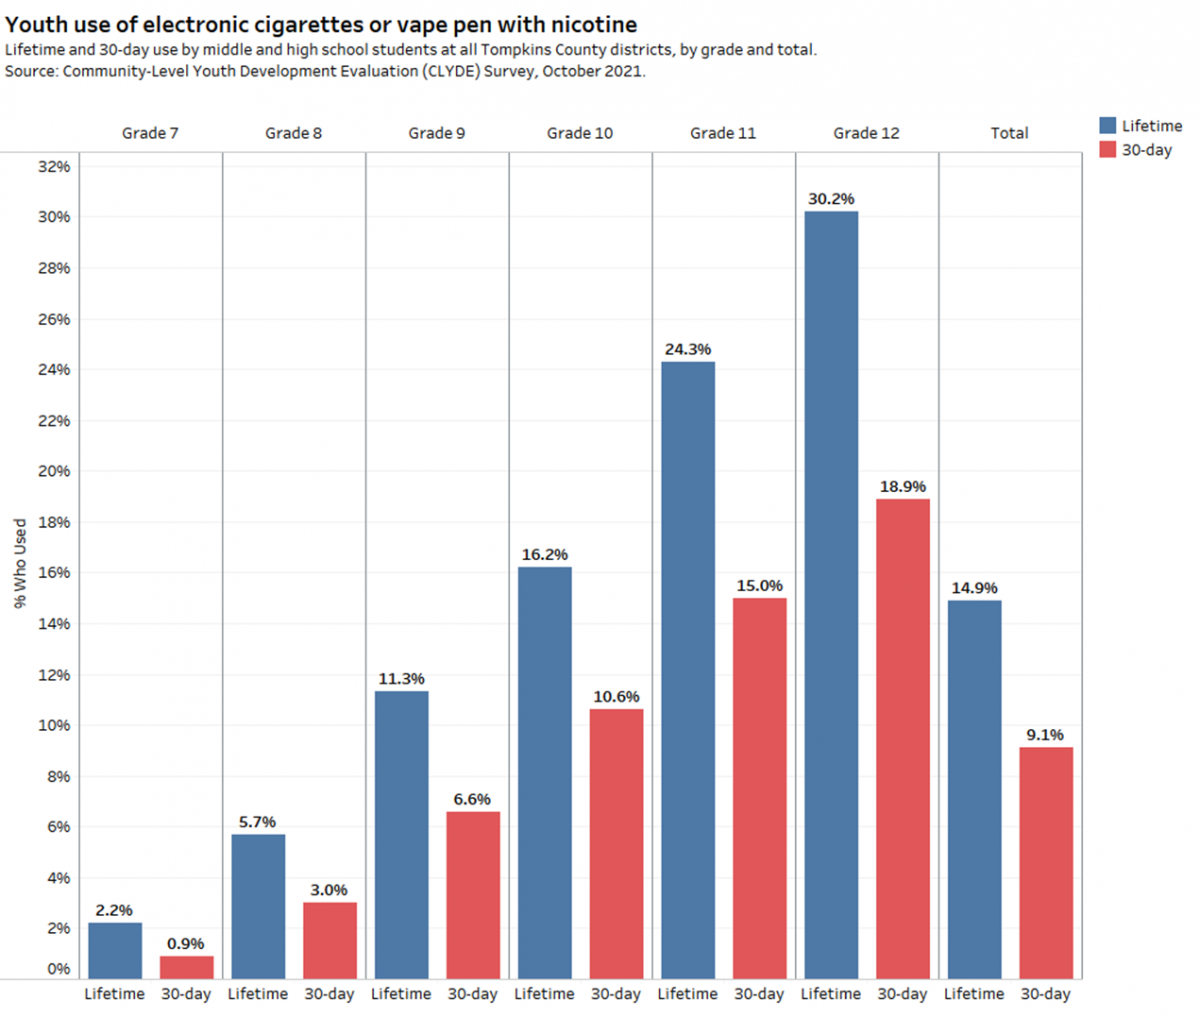 bar graph of the prevalence of vaping among students grade 7 to 12 at Tompkins County schools